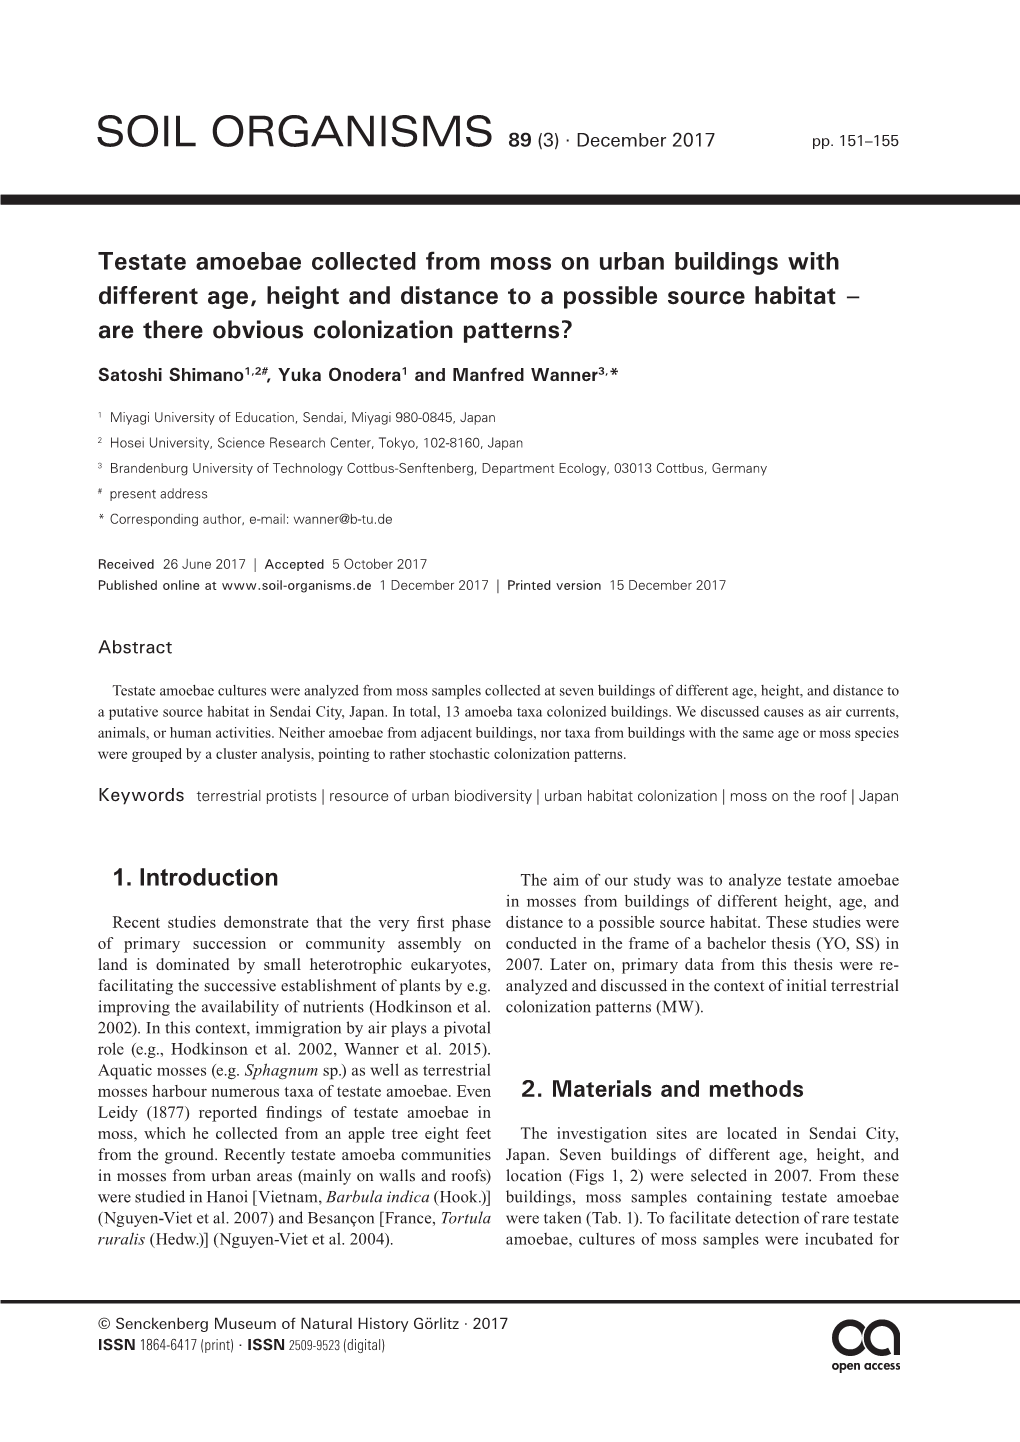 Testate Amoebae Collected from Moss on Urban Buildings with Different Age, Height and Distance to a Possible Source Habitat – Are There Obvious Colonization Patterns?